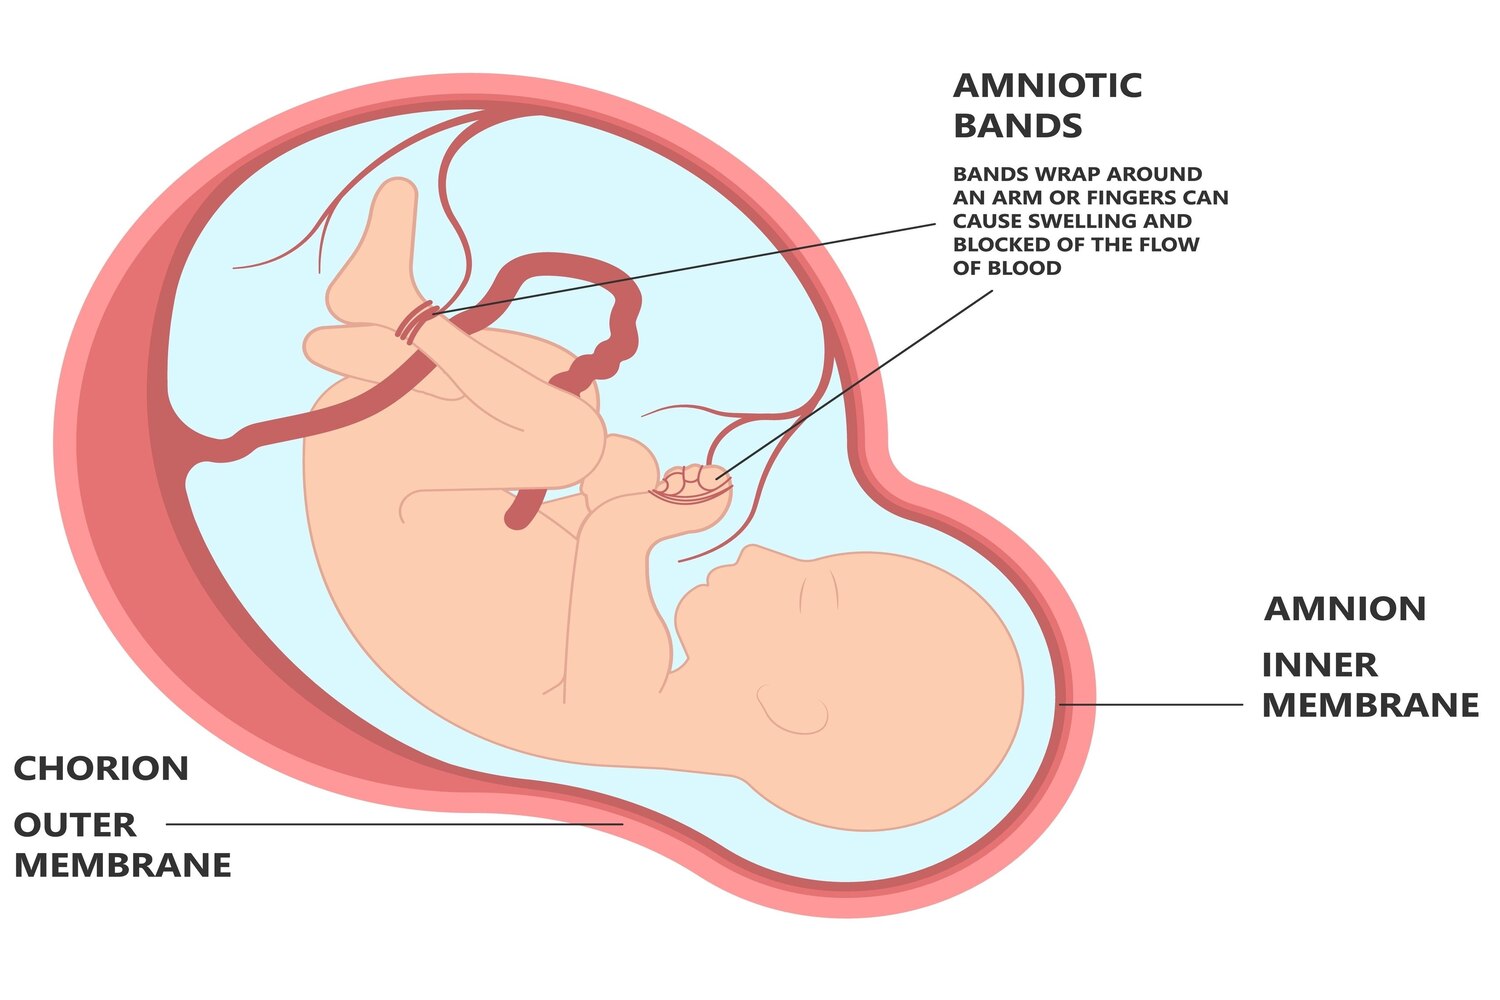 What Leads To Amniotic Band Syndrome?